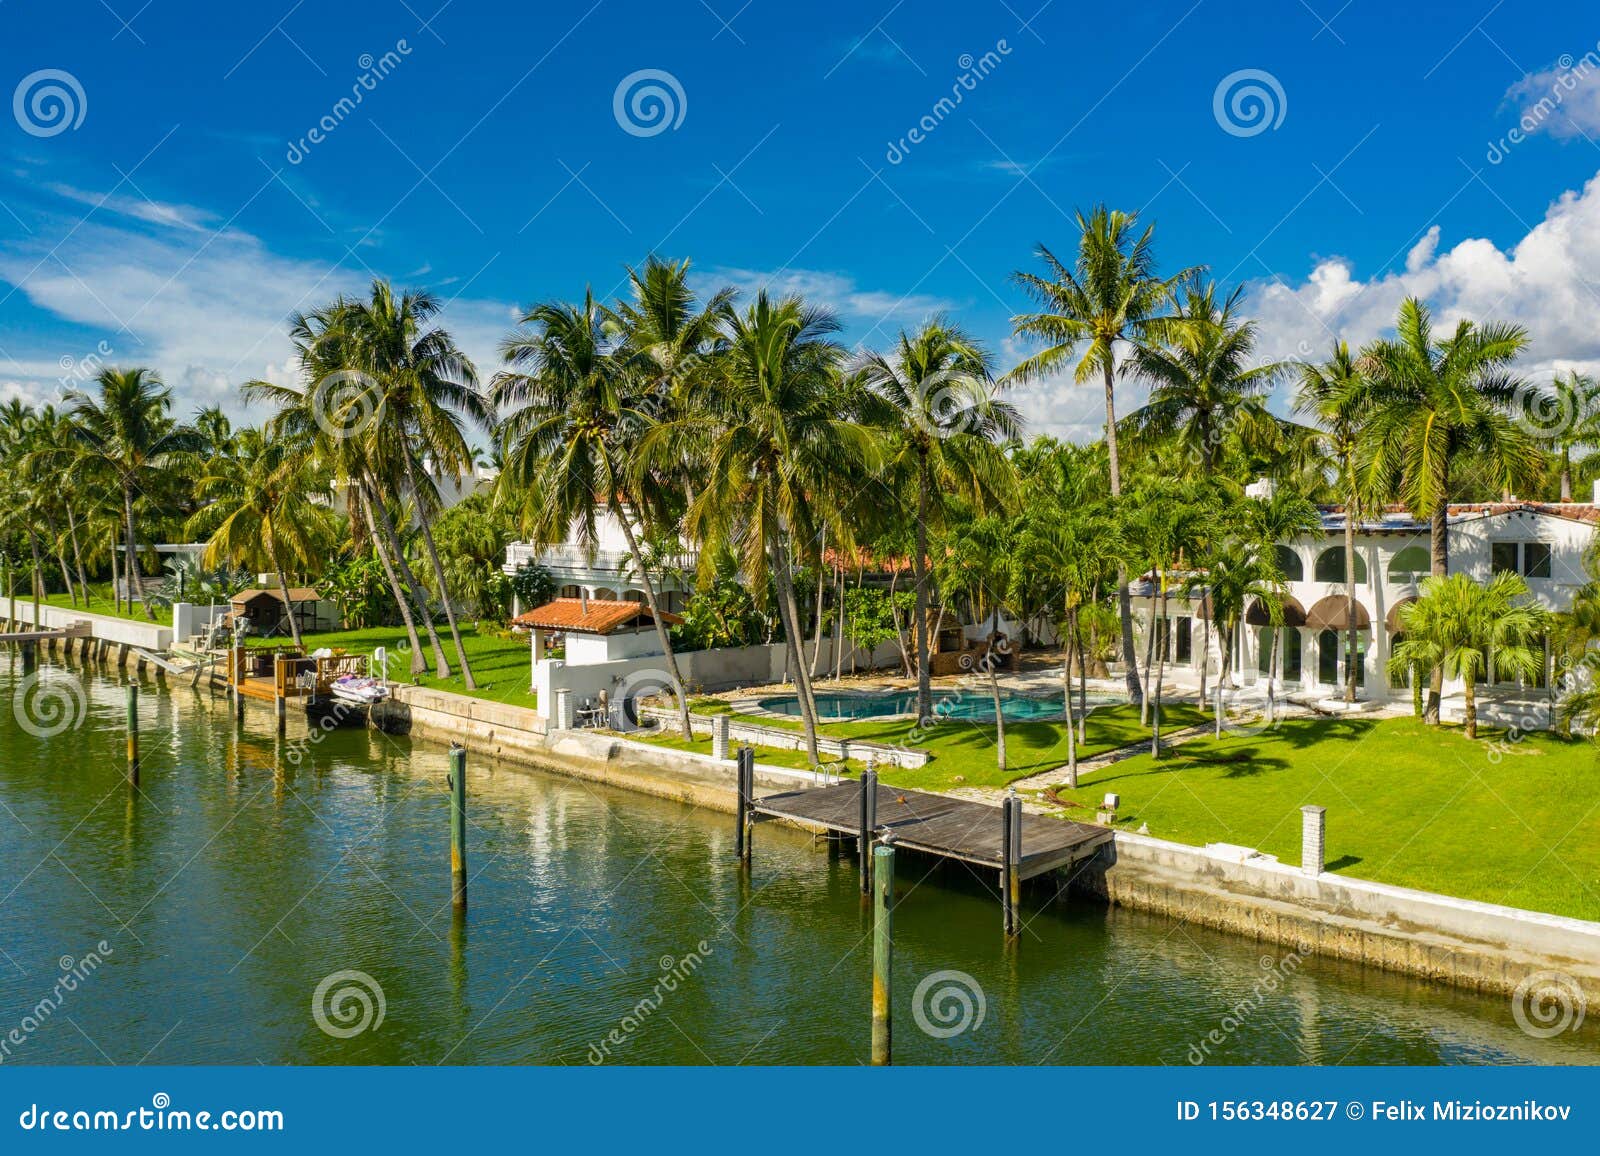 aerials of miami beach luxury homes on the water